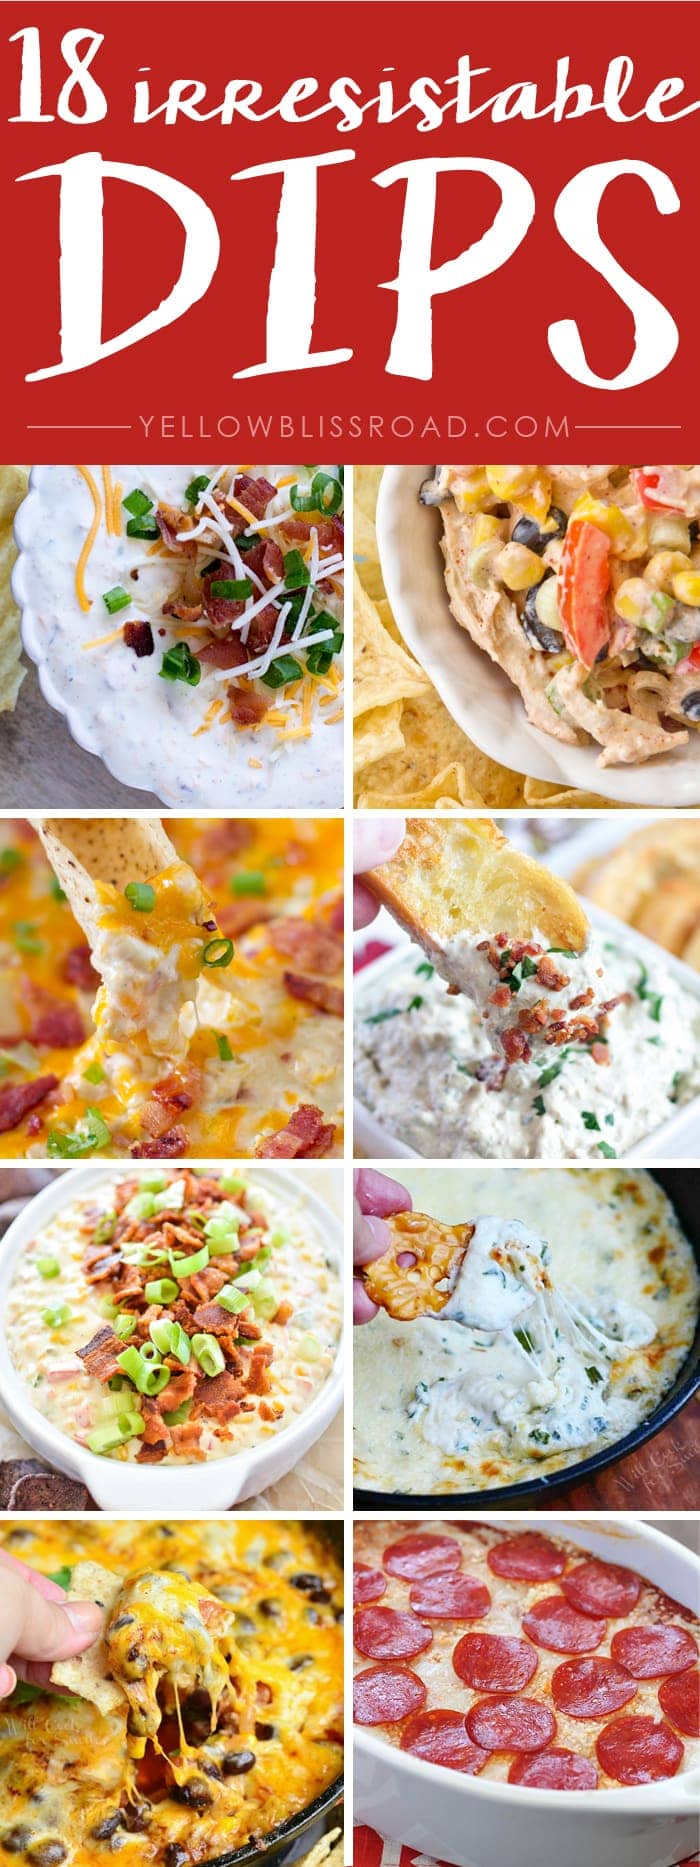 18 Unique and Irresistable Dips